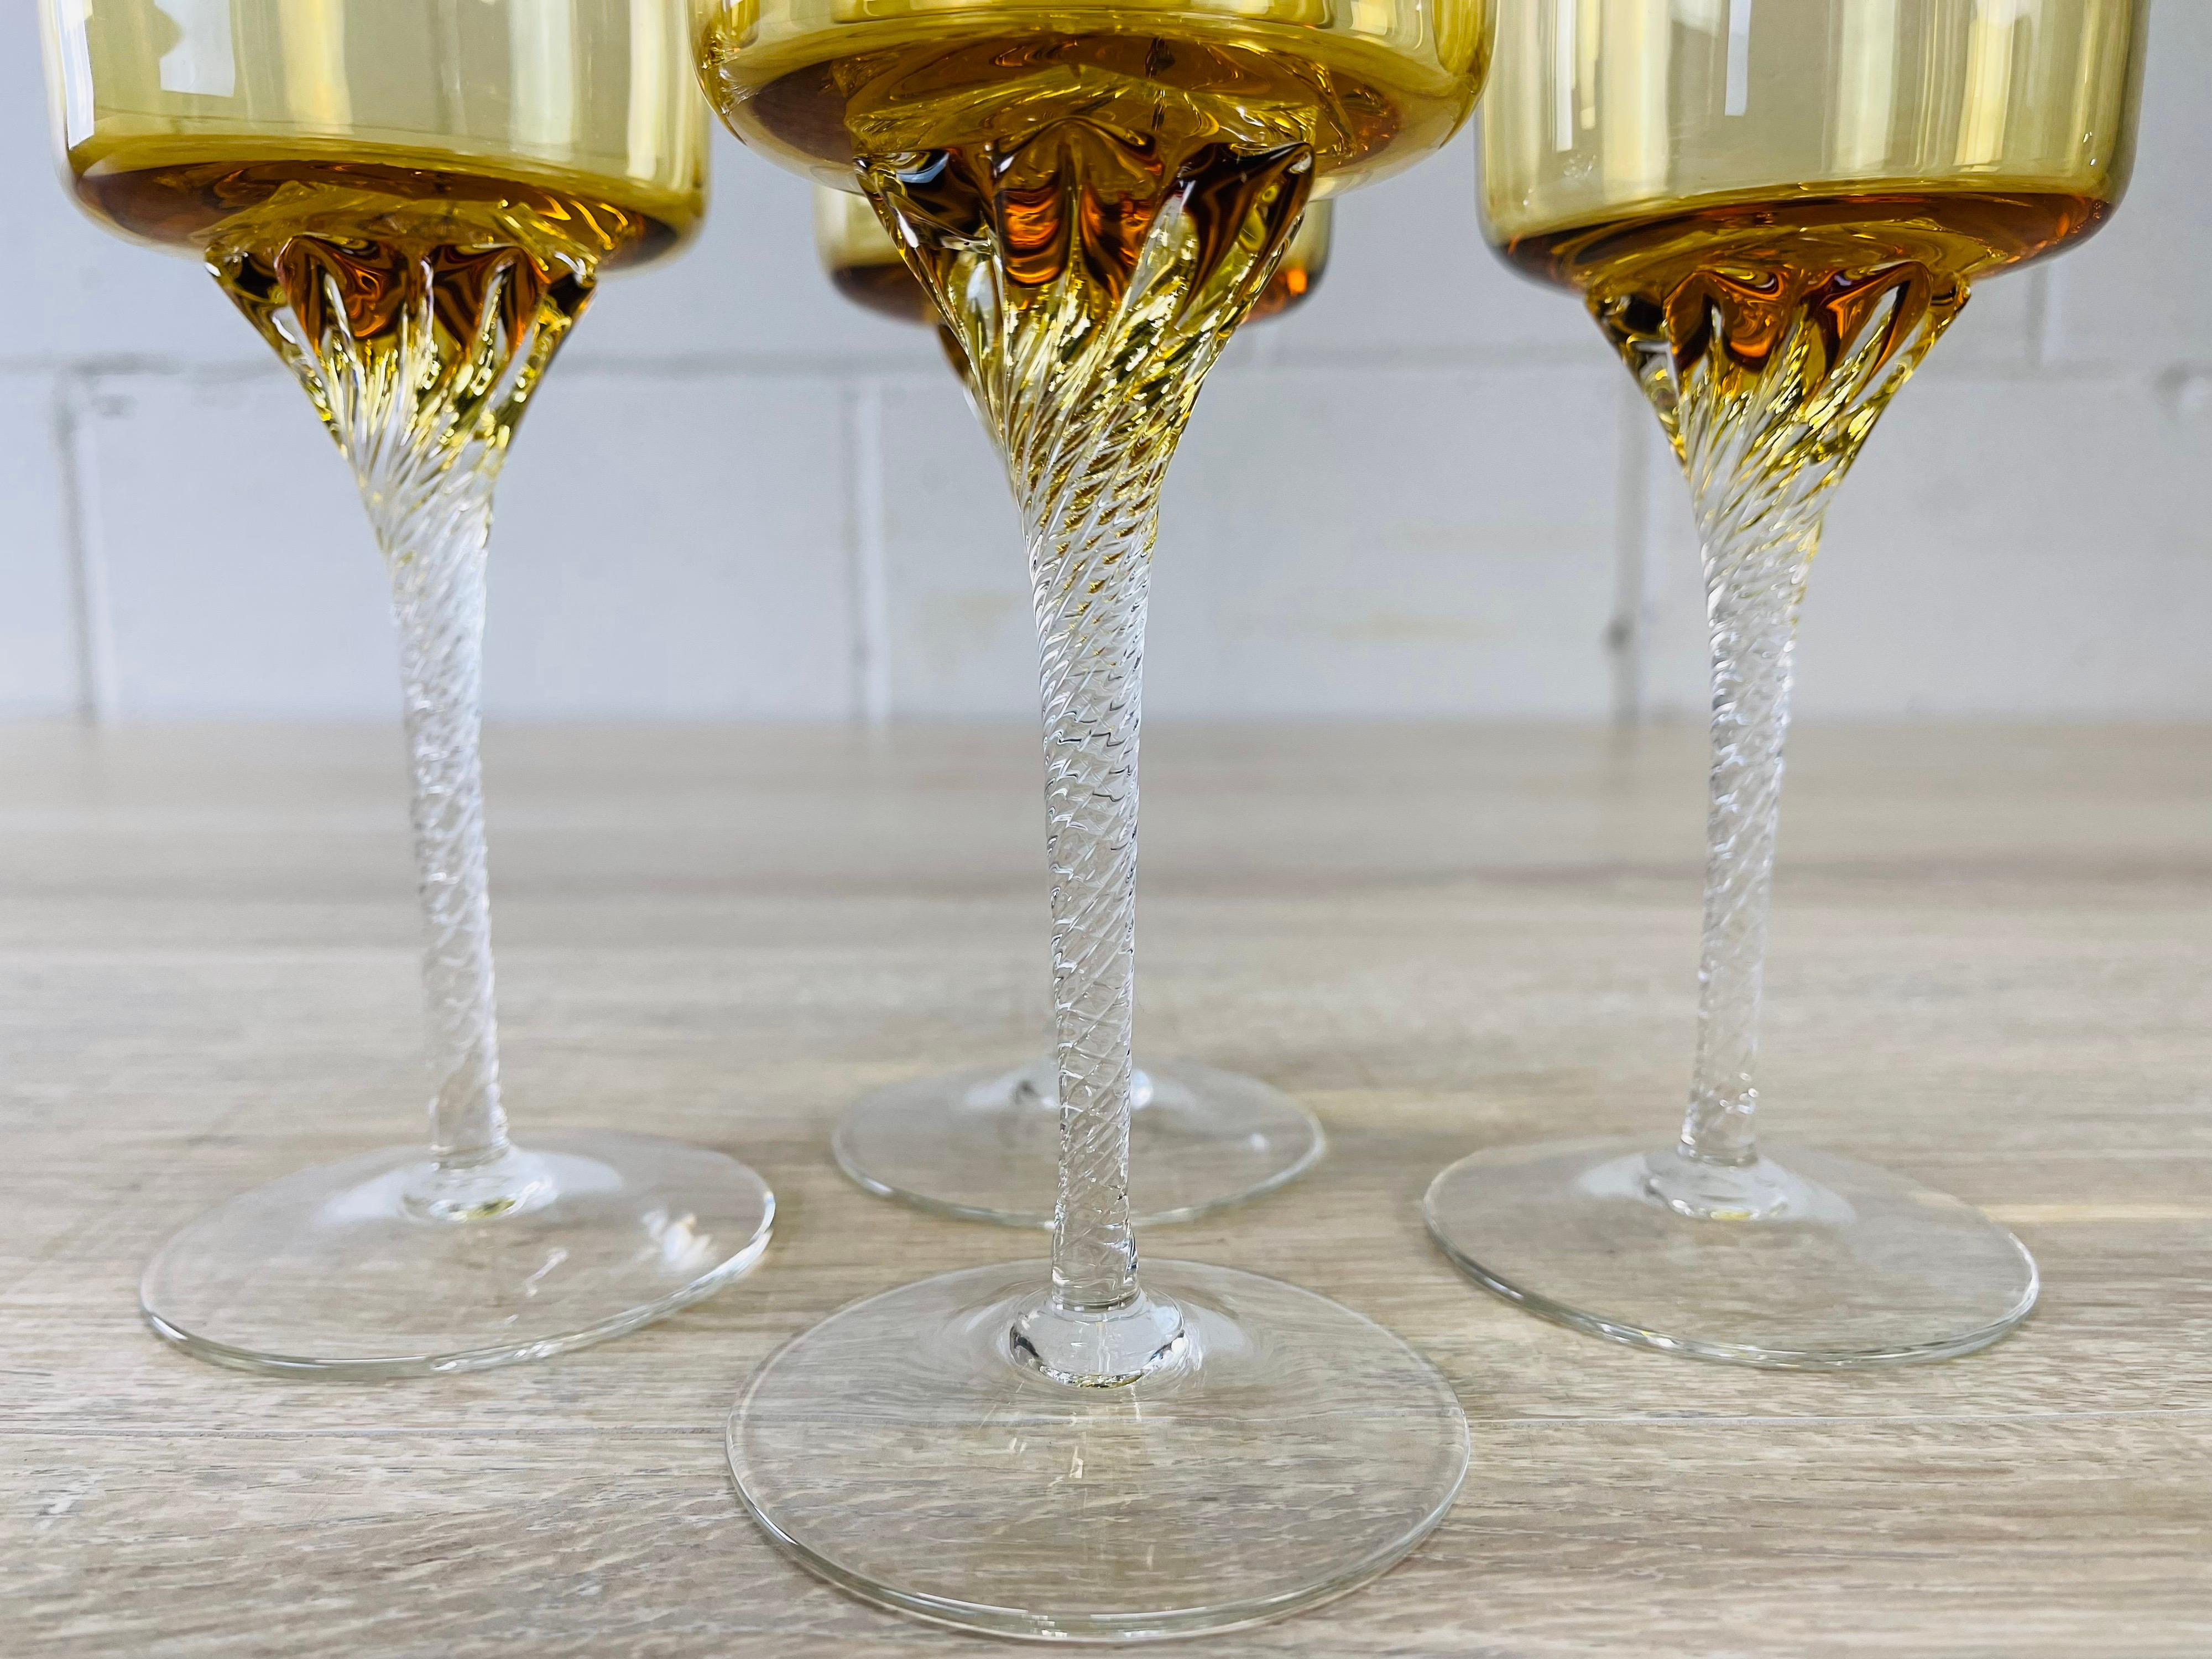 Mid-Century Modern 1960s Amber Tall Glass Wine Goblets with Twisted Stems, Set of 4 For Sale